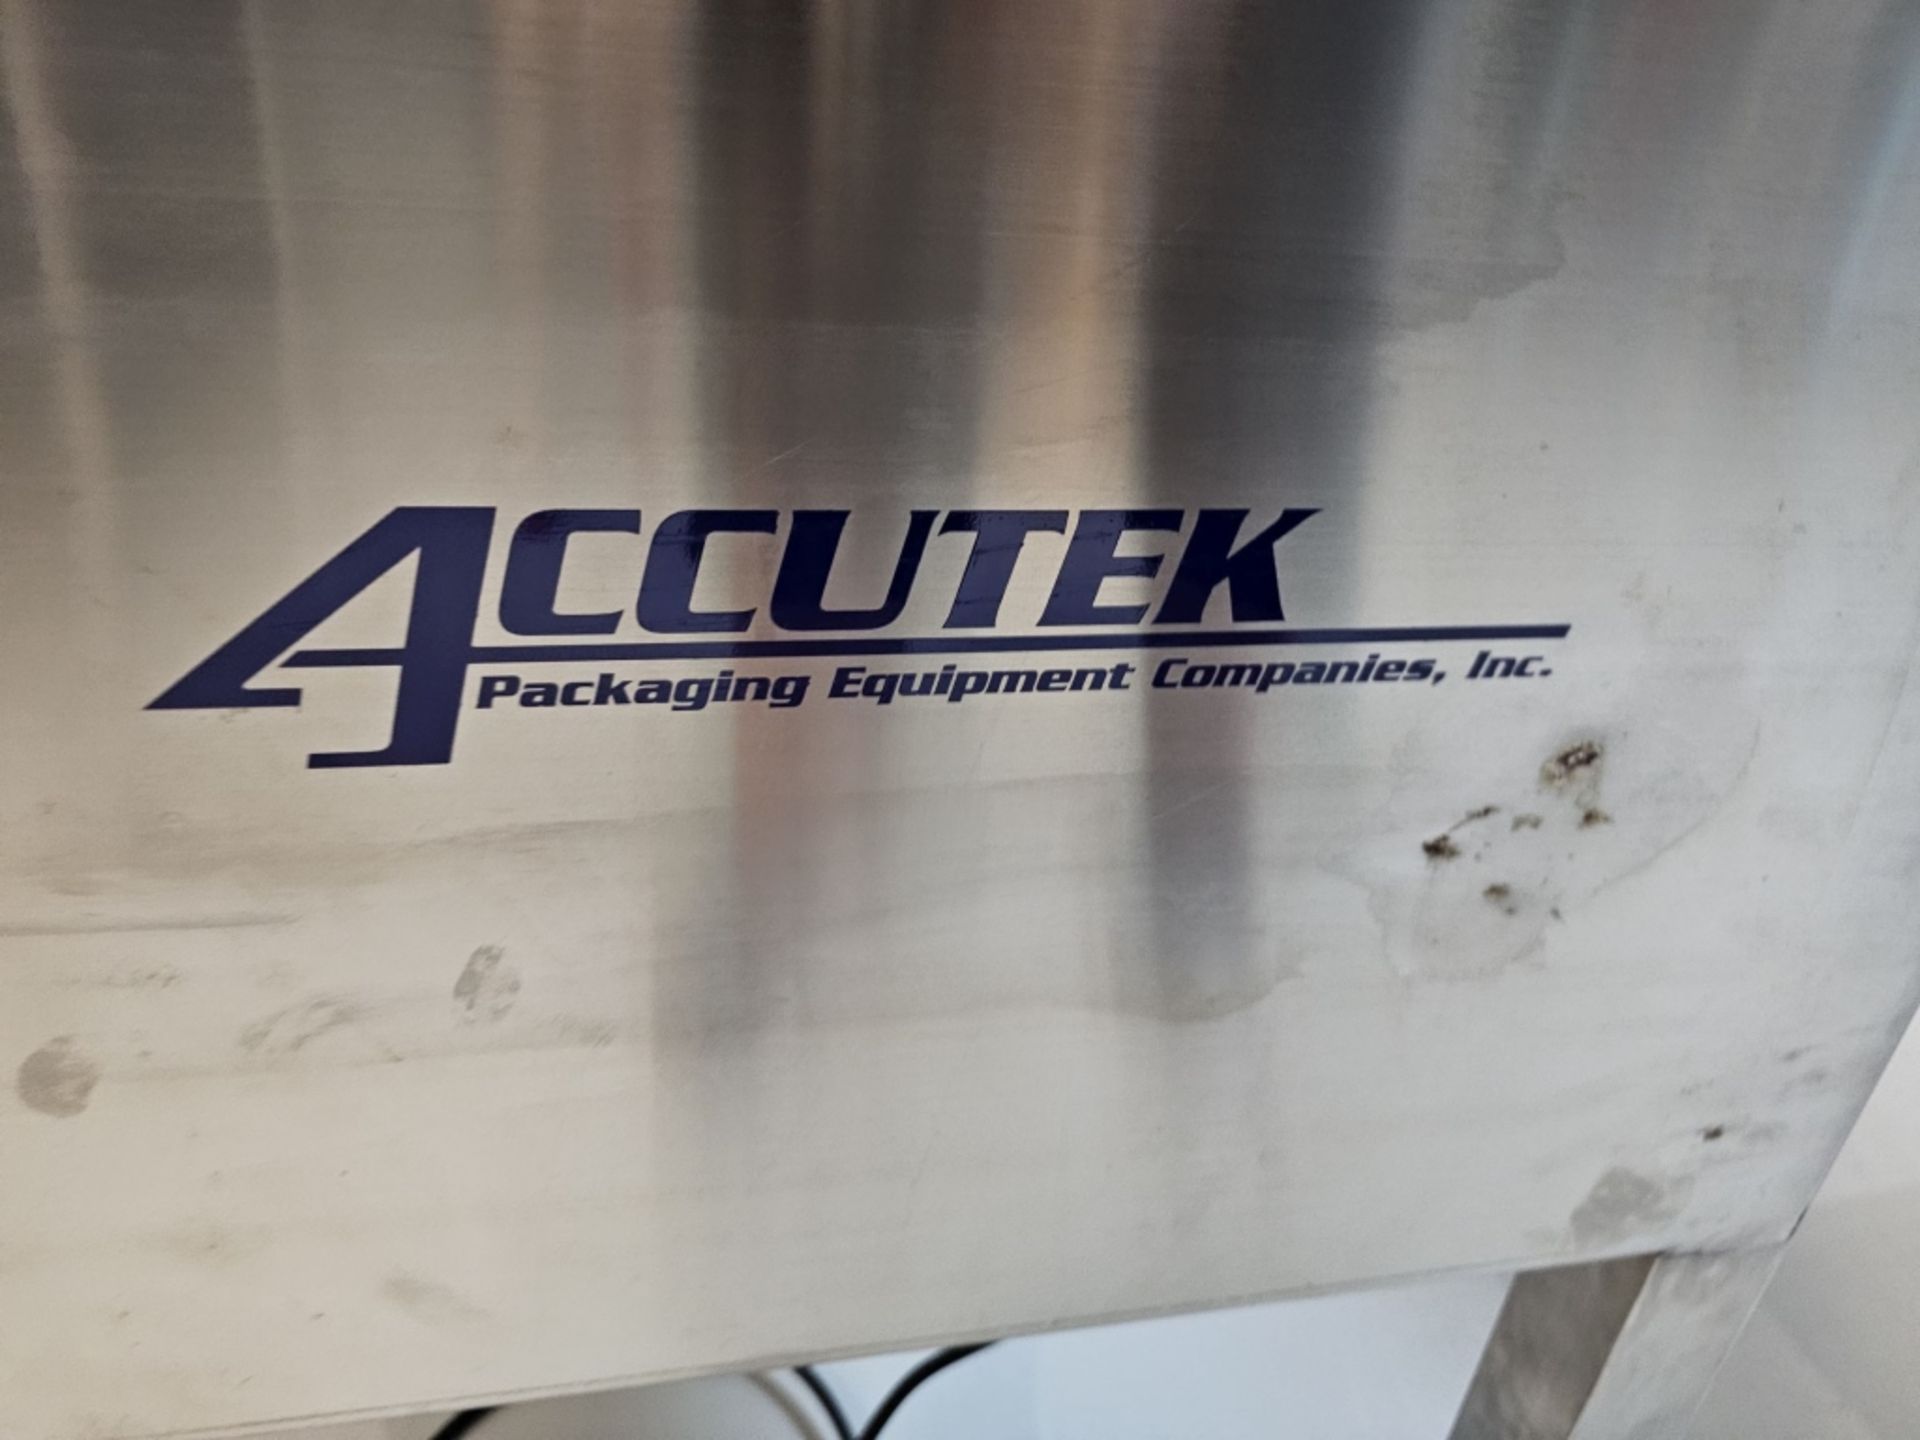 2016 Accutek Packaging Model 2-042-USA 42" Rotary Accumulation / Rotary Table - Image 4 of 5